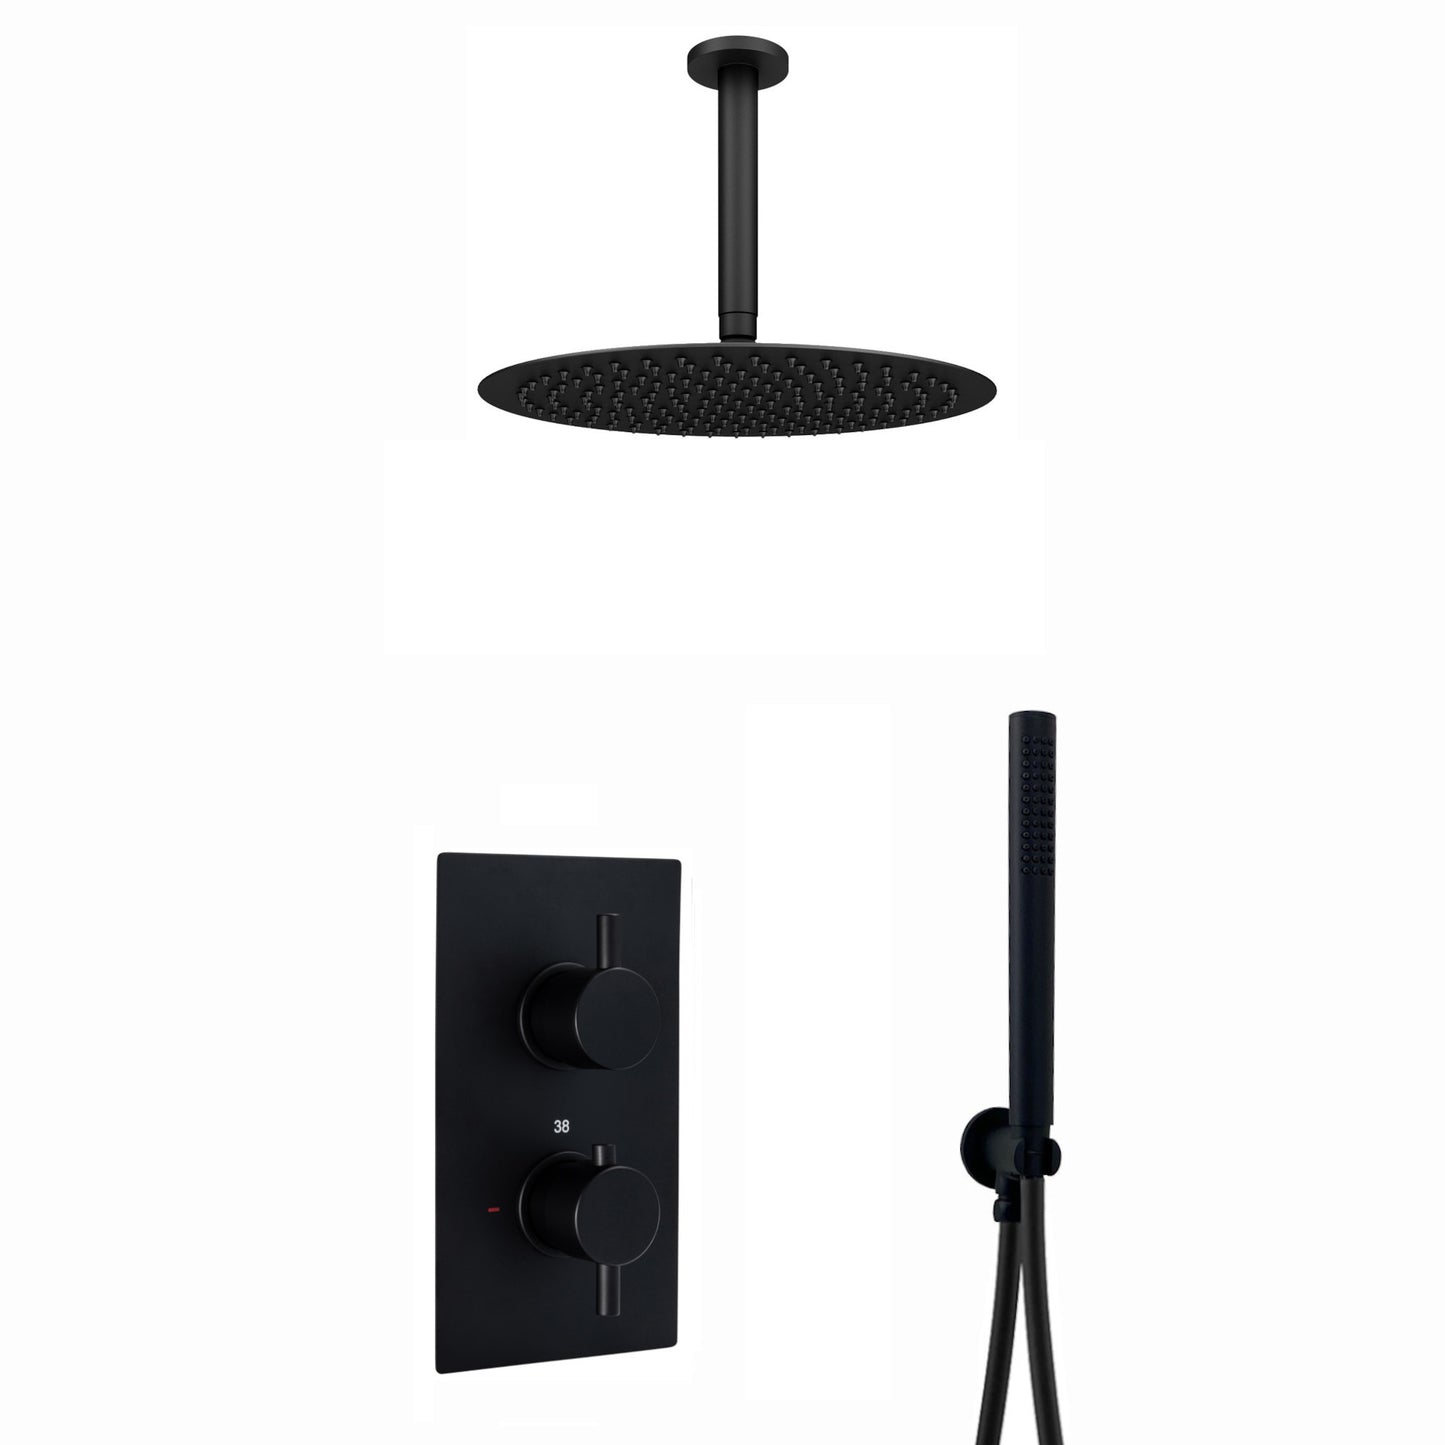 Venice Contemporary Round Concealed Thermostatic Shower Set Incl. Twin Valve, Ceiling Fixed 8" Shower Head, Handshower Kit - Matte Black (2 Outlet)